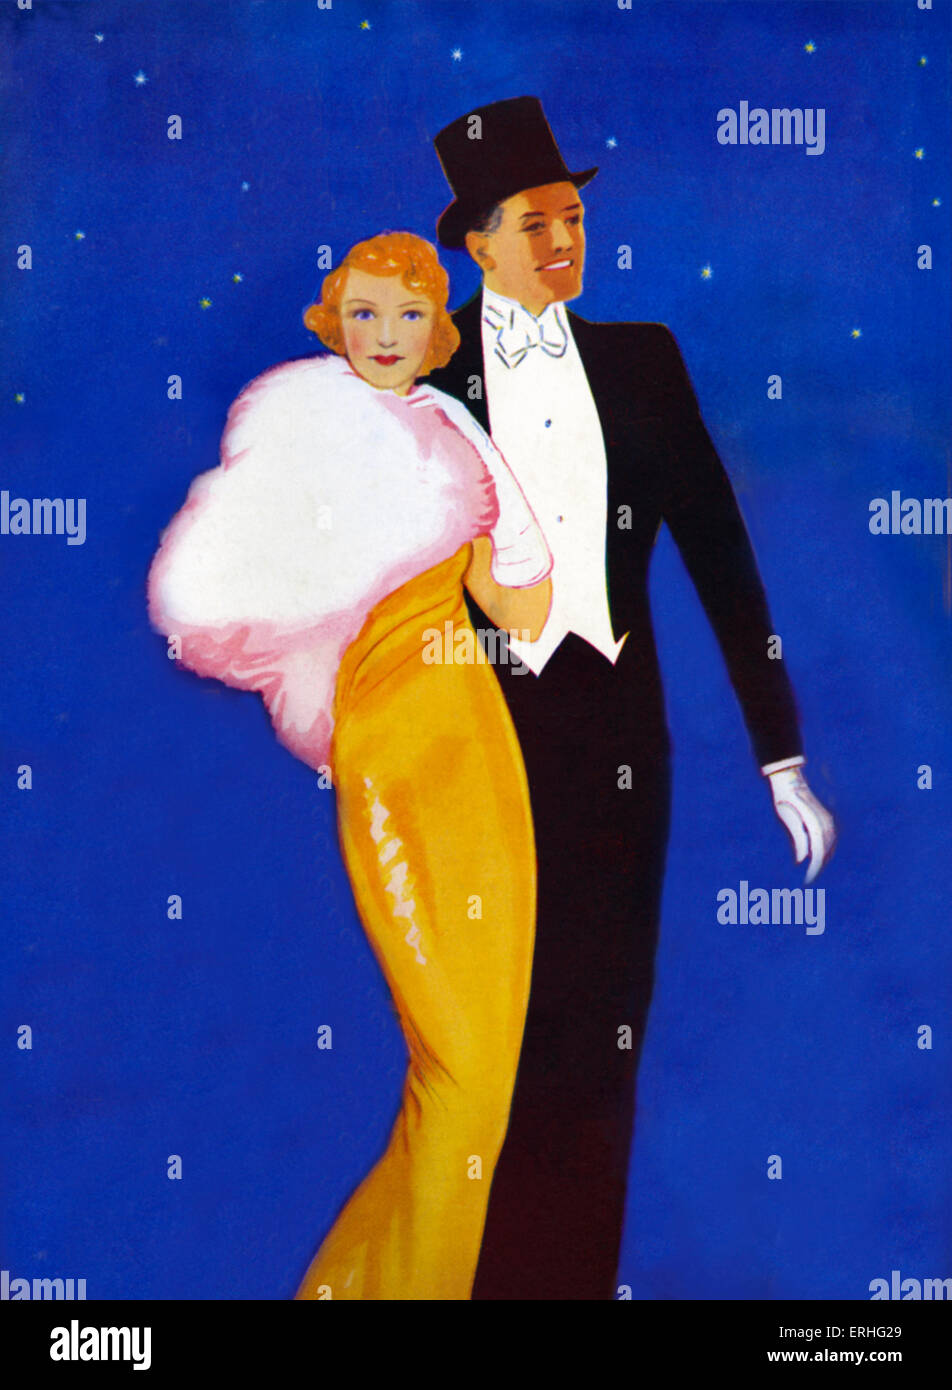 1930s couple in evening dress going out on the town. Top hat, yellow dress with white fur cape and midnight blue sky with stars. White gloves, evening dress. Stock Photo